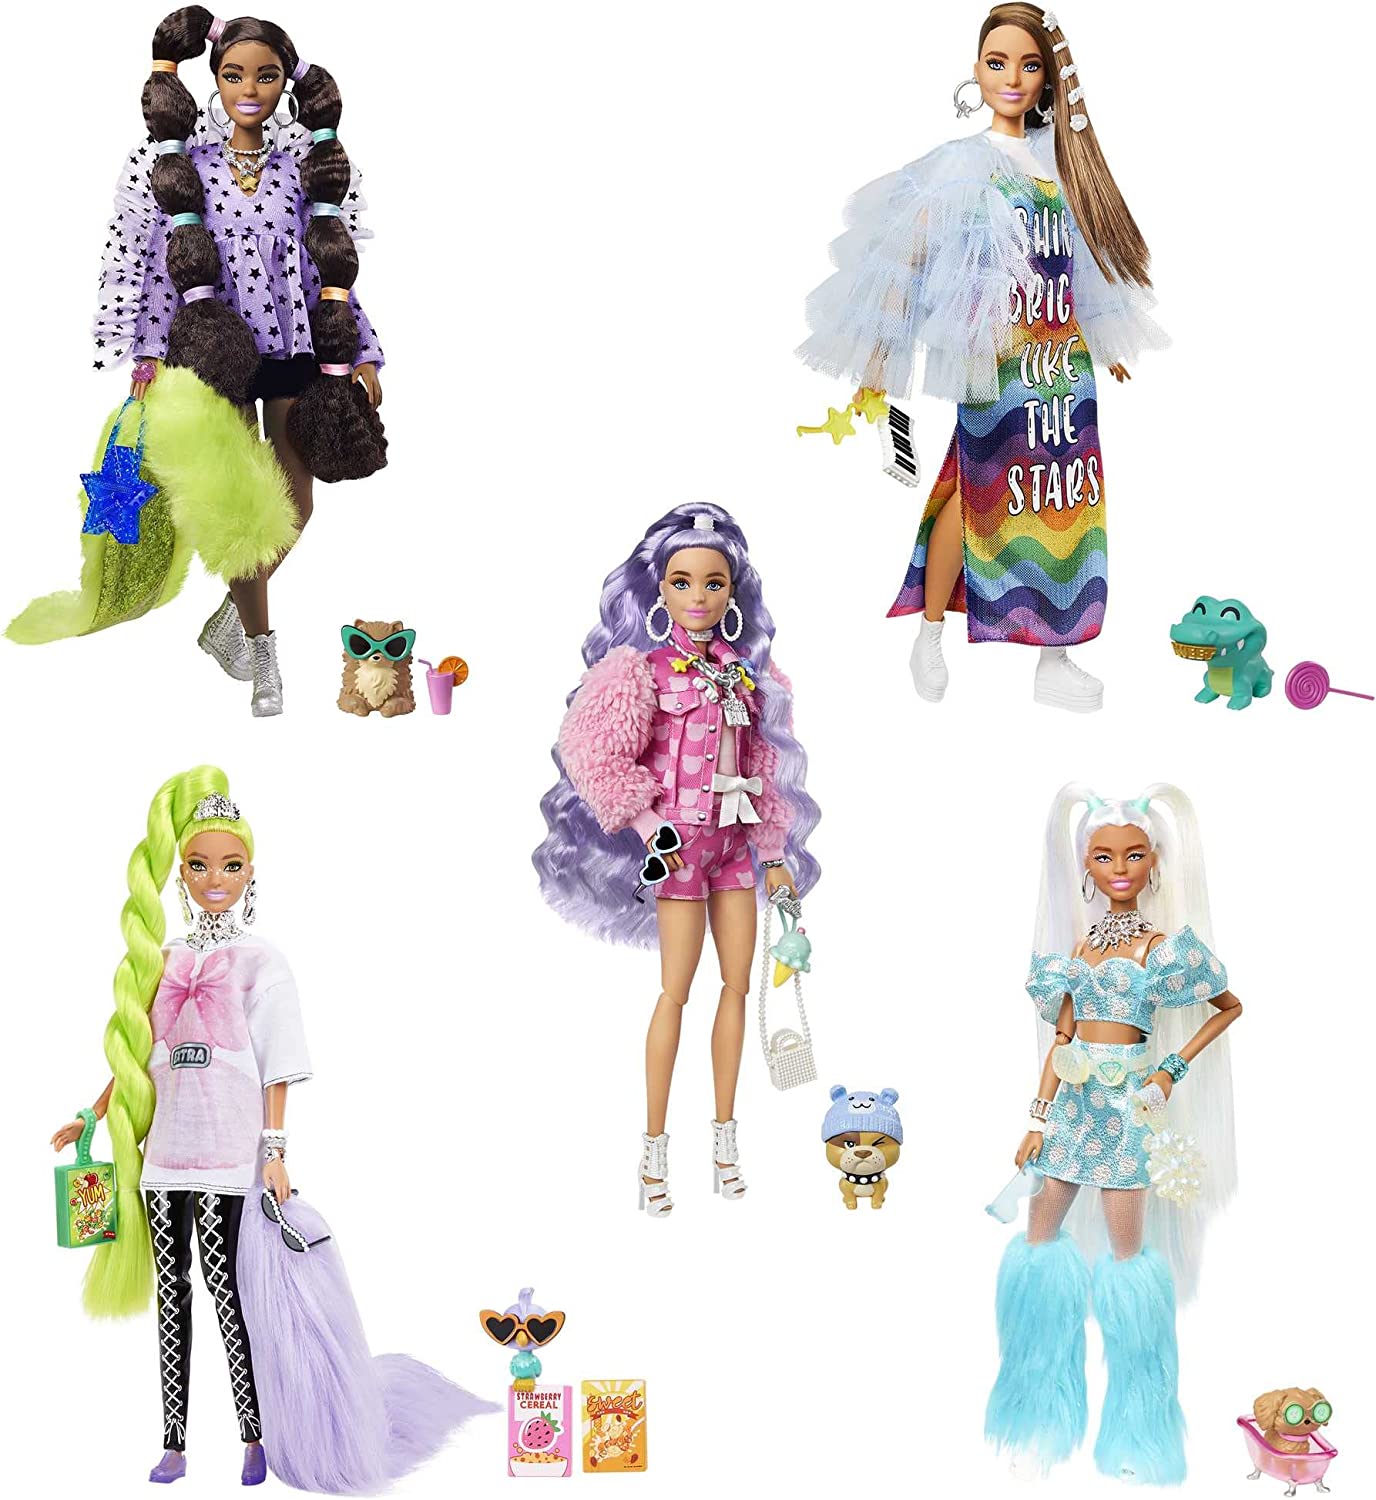 Barbie Extra 5 pack doll set with new exclusive Barbie Extra doll